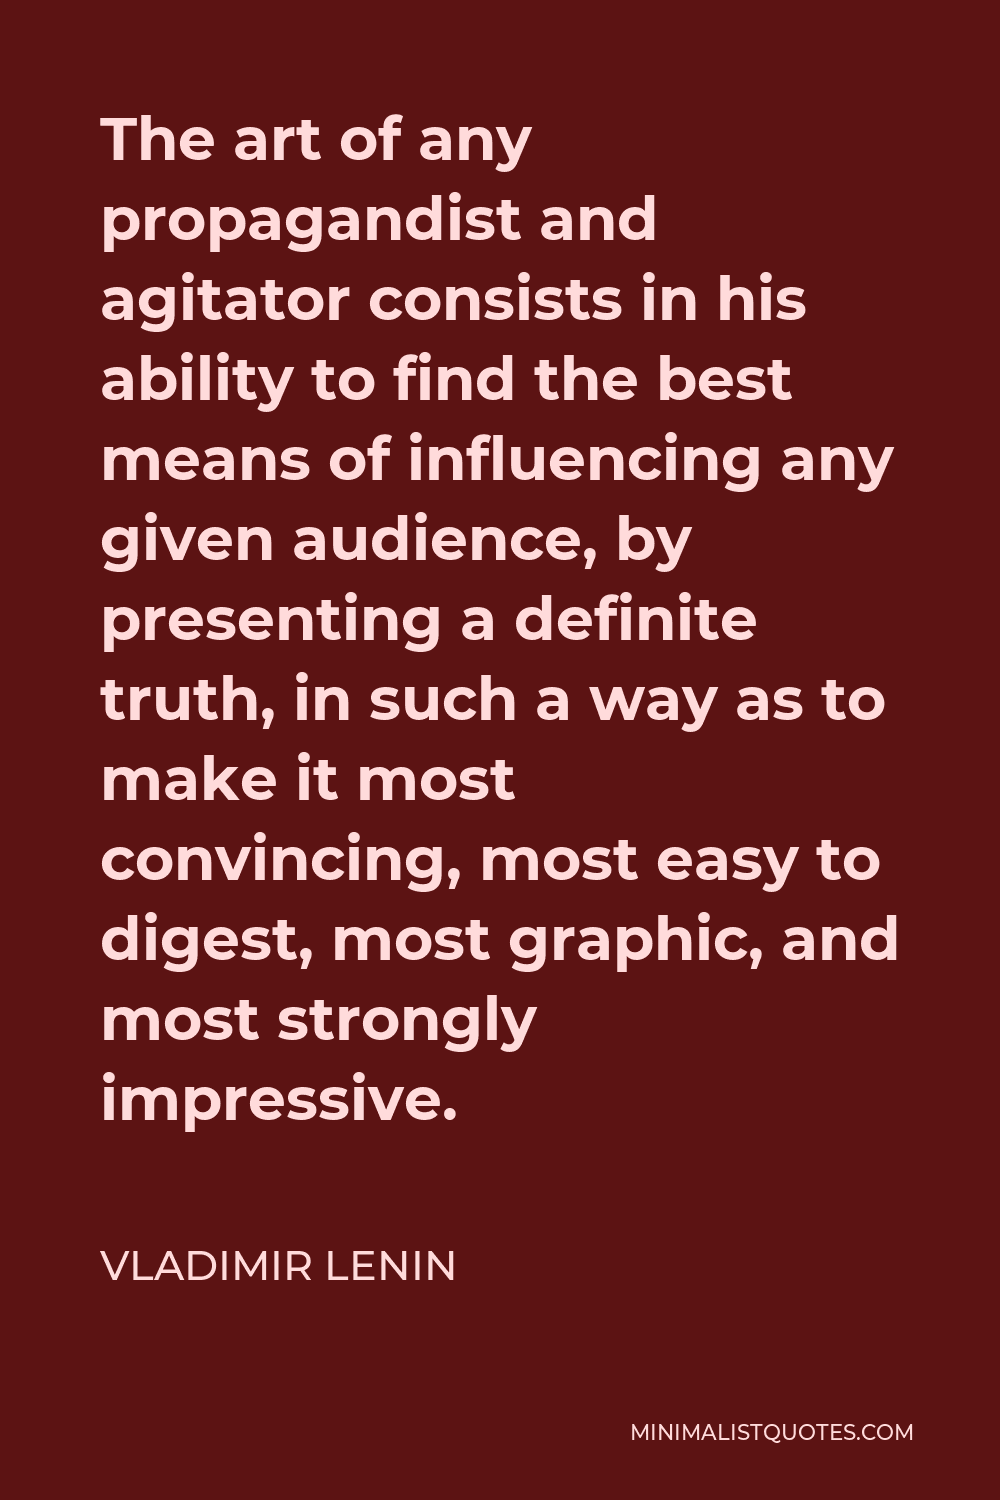 Vladimir Lenin Quote - The art of any propagandist and agitator consists in his ability to find the best means of influencing any given audience, by presenting a definite truth, in such a way as to make it most convincing, most easy to digest, most graphic, and most strongly impressive.